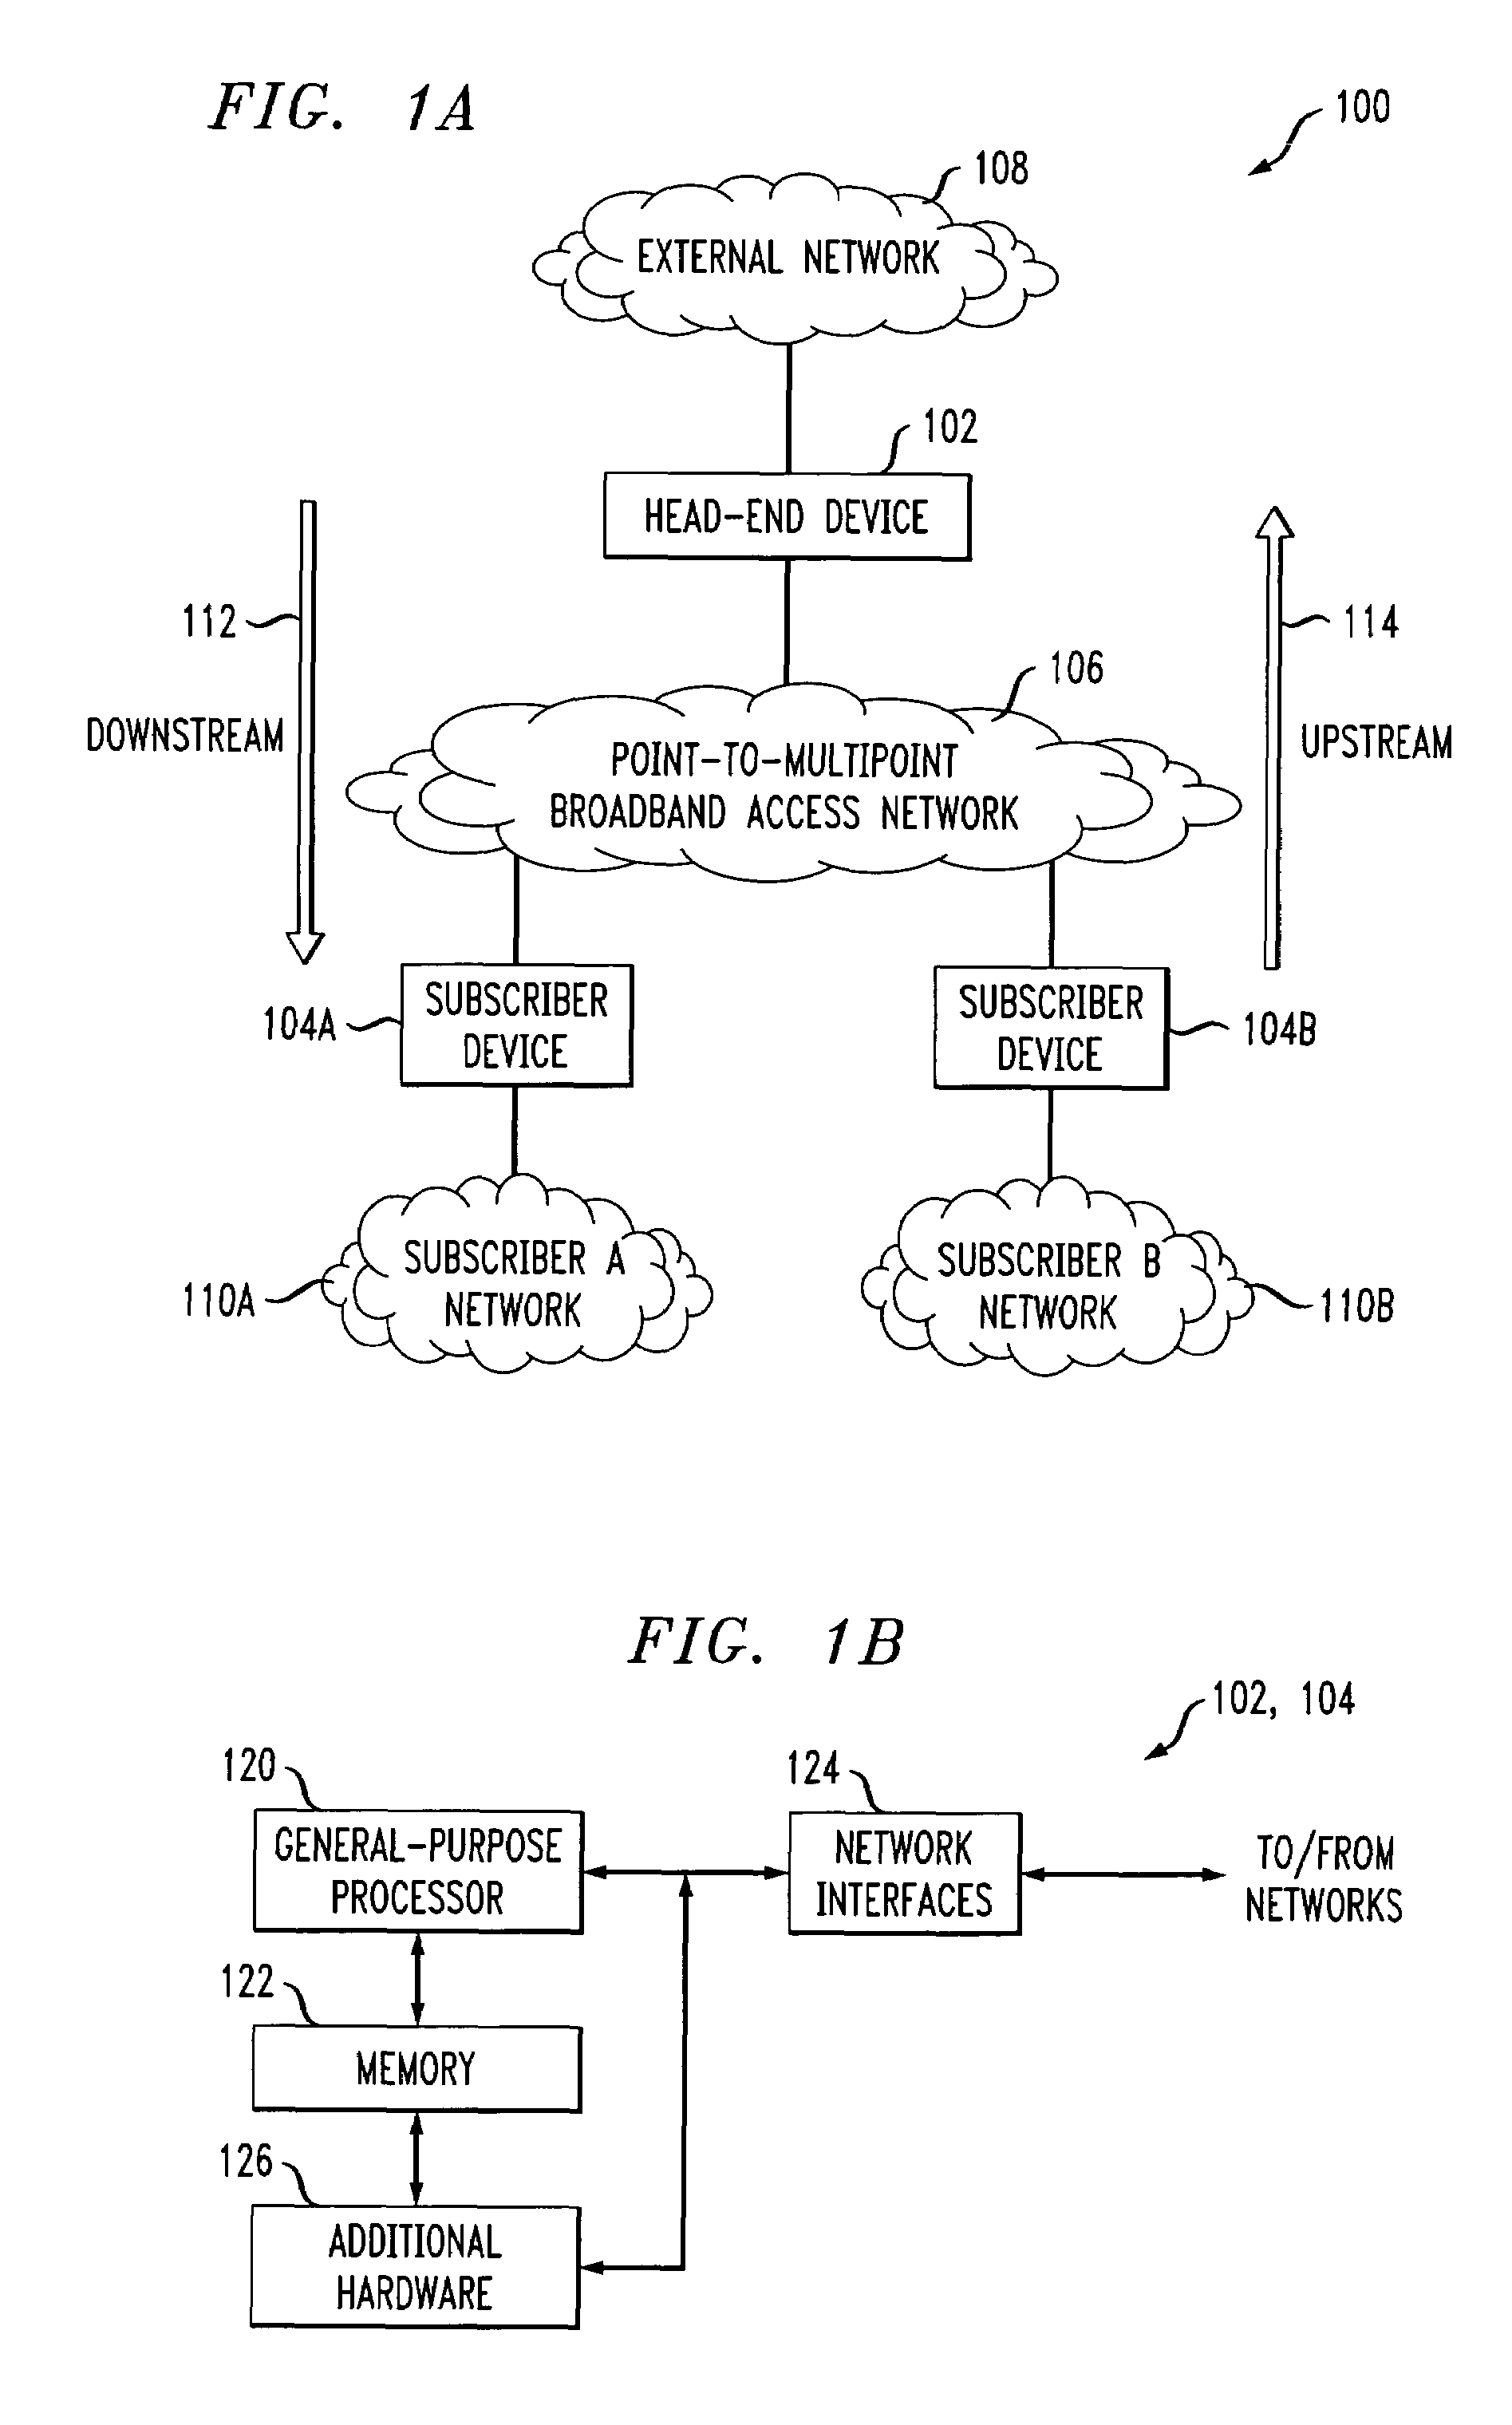 Software-hardware partitioning of a scheduled medium-access protocol